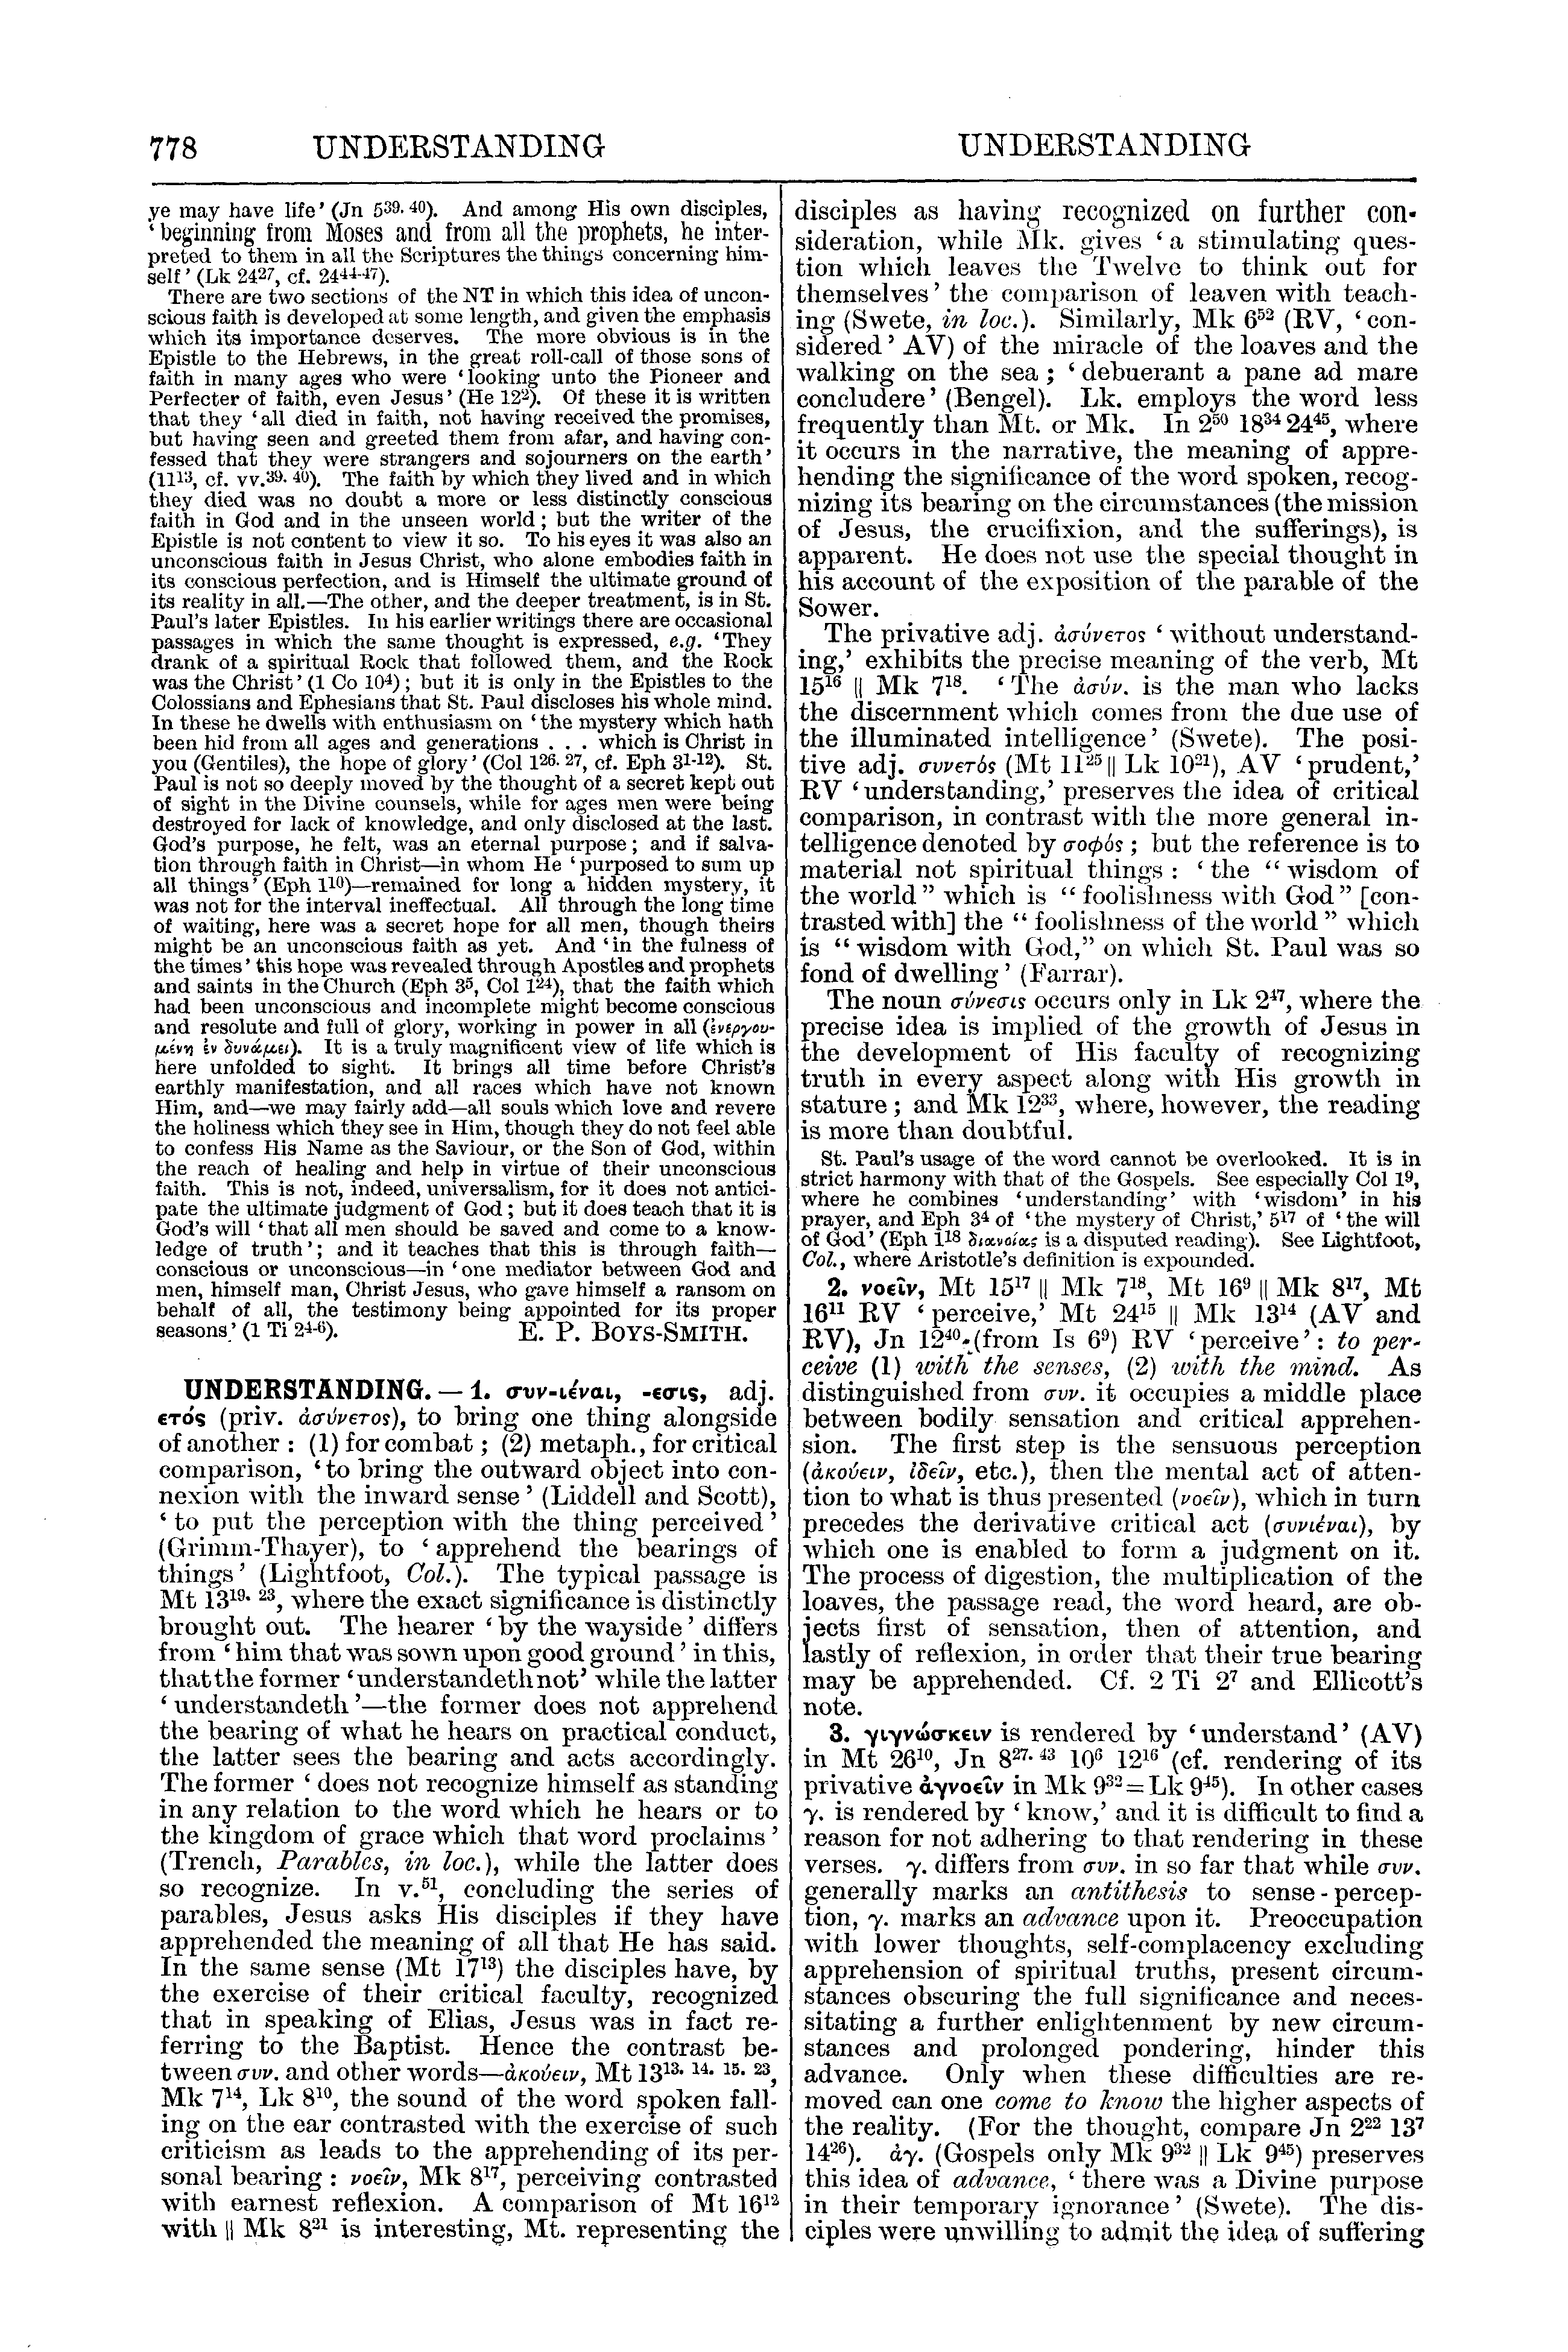 Image of page 778